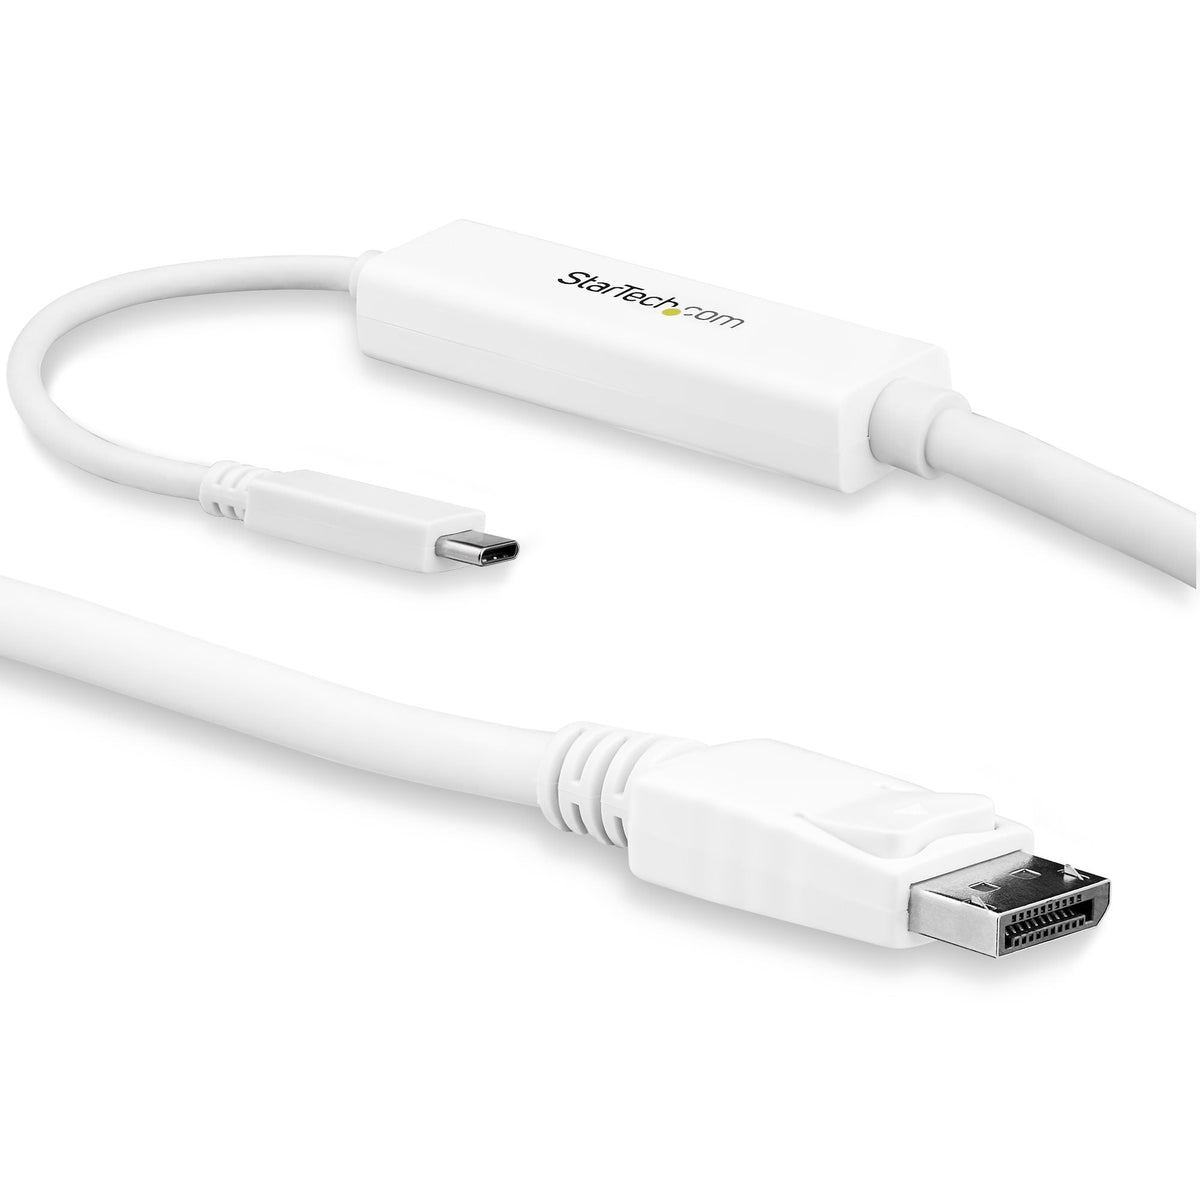 StarTech.com 9.8ft/3m USB C to DisplayPort 1.2 Cable 4K 60Hz - USB-C to DisplayPort Adapter Cable HBR2 - USB Type-C DP Alt Mode to DP Monitor Video Cable - Works w/ Thunderbolt 3 - White